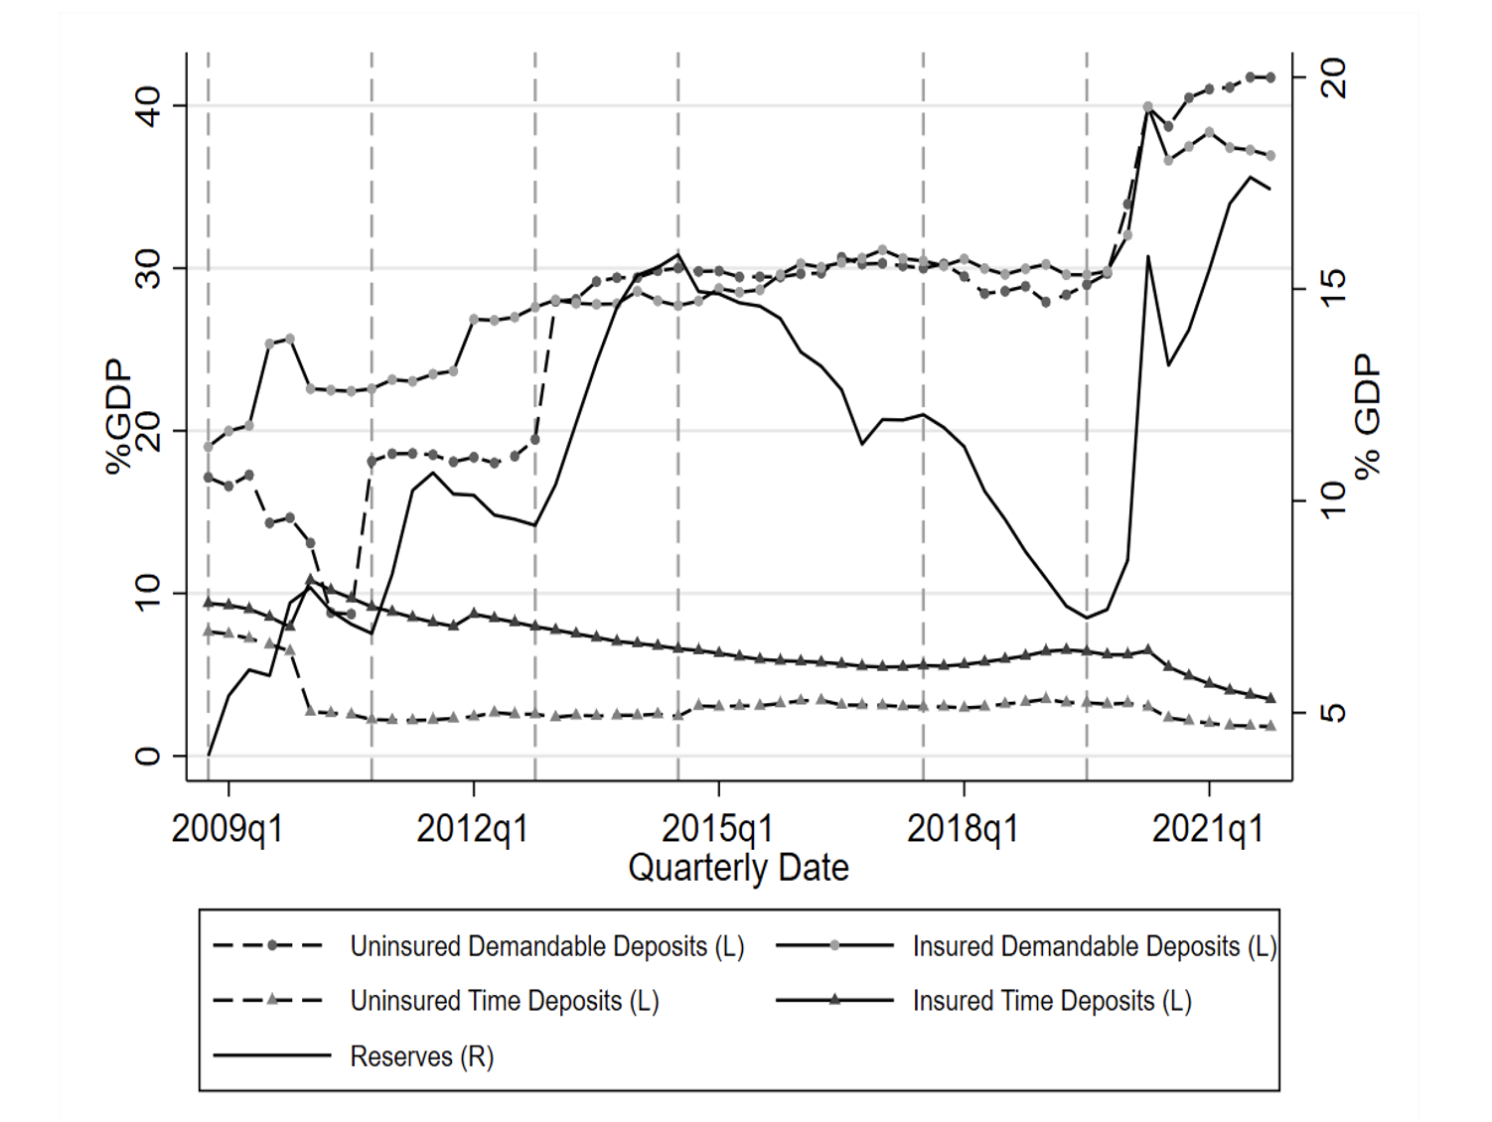 C) Uninsured and insured demand and time deposits, and reserves, as a percentage of GDP